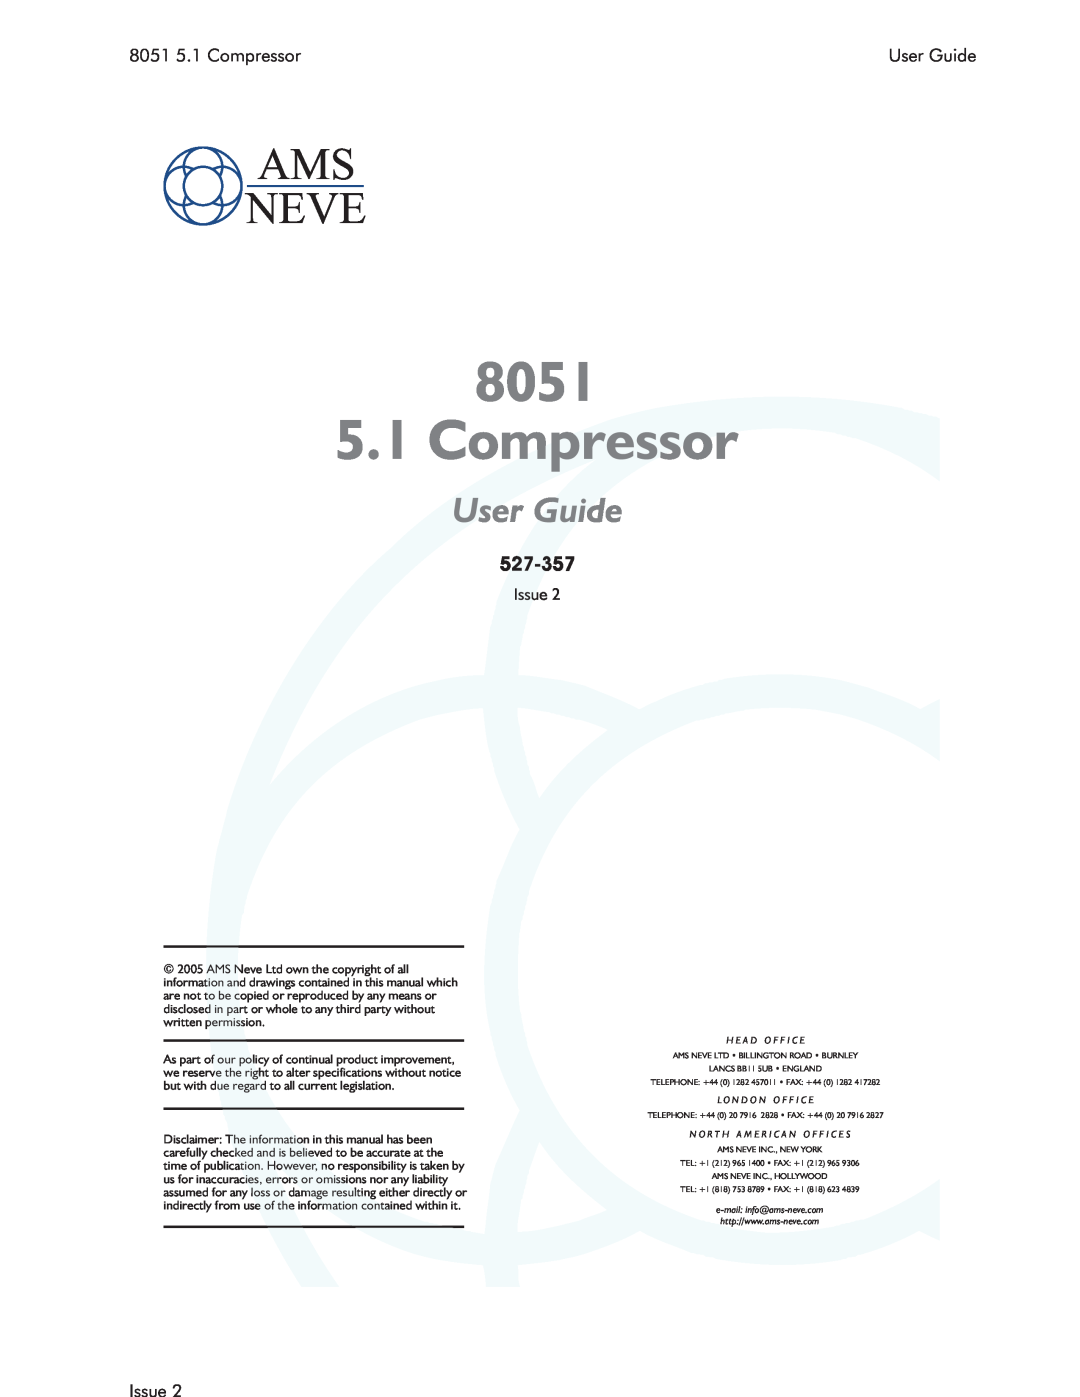 AMS specifications 8051 5.1 Compressor, Ams Neve, User Guide 